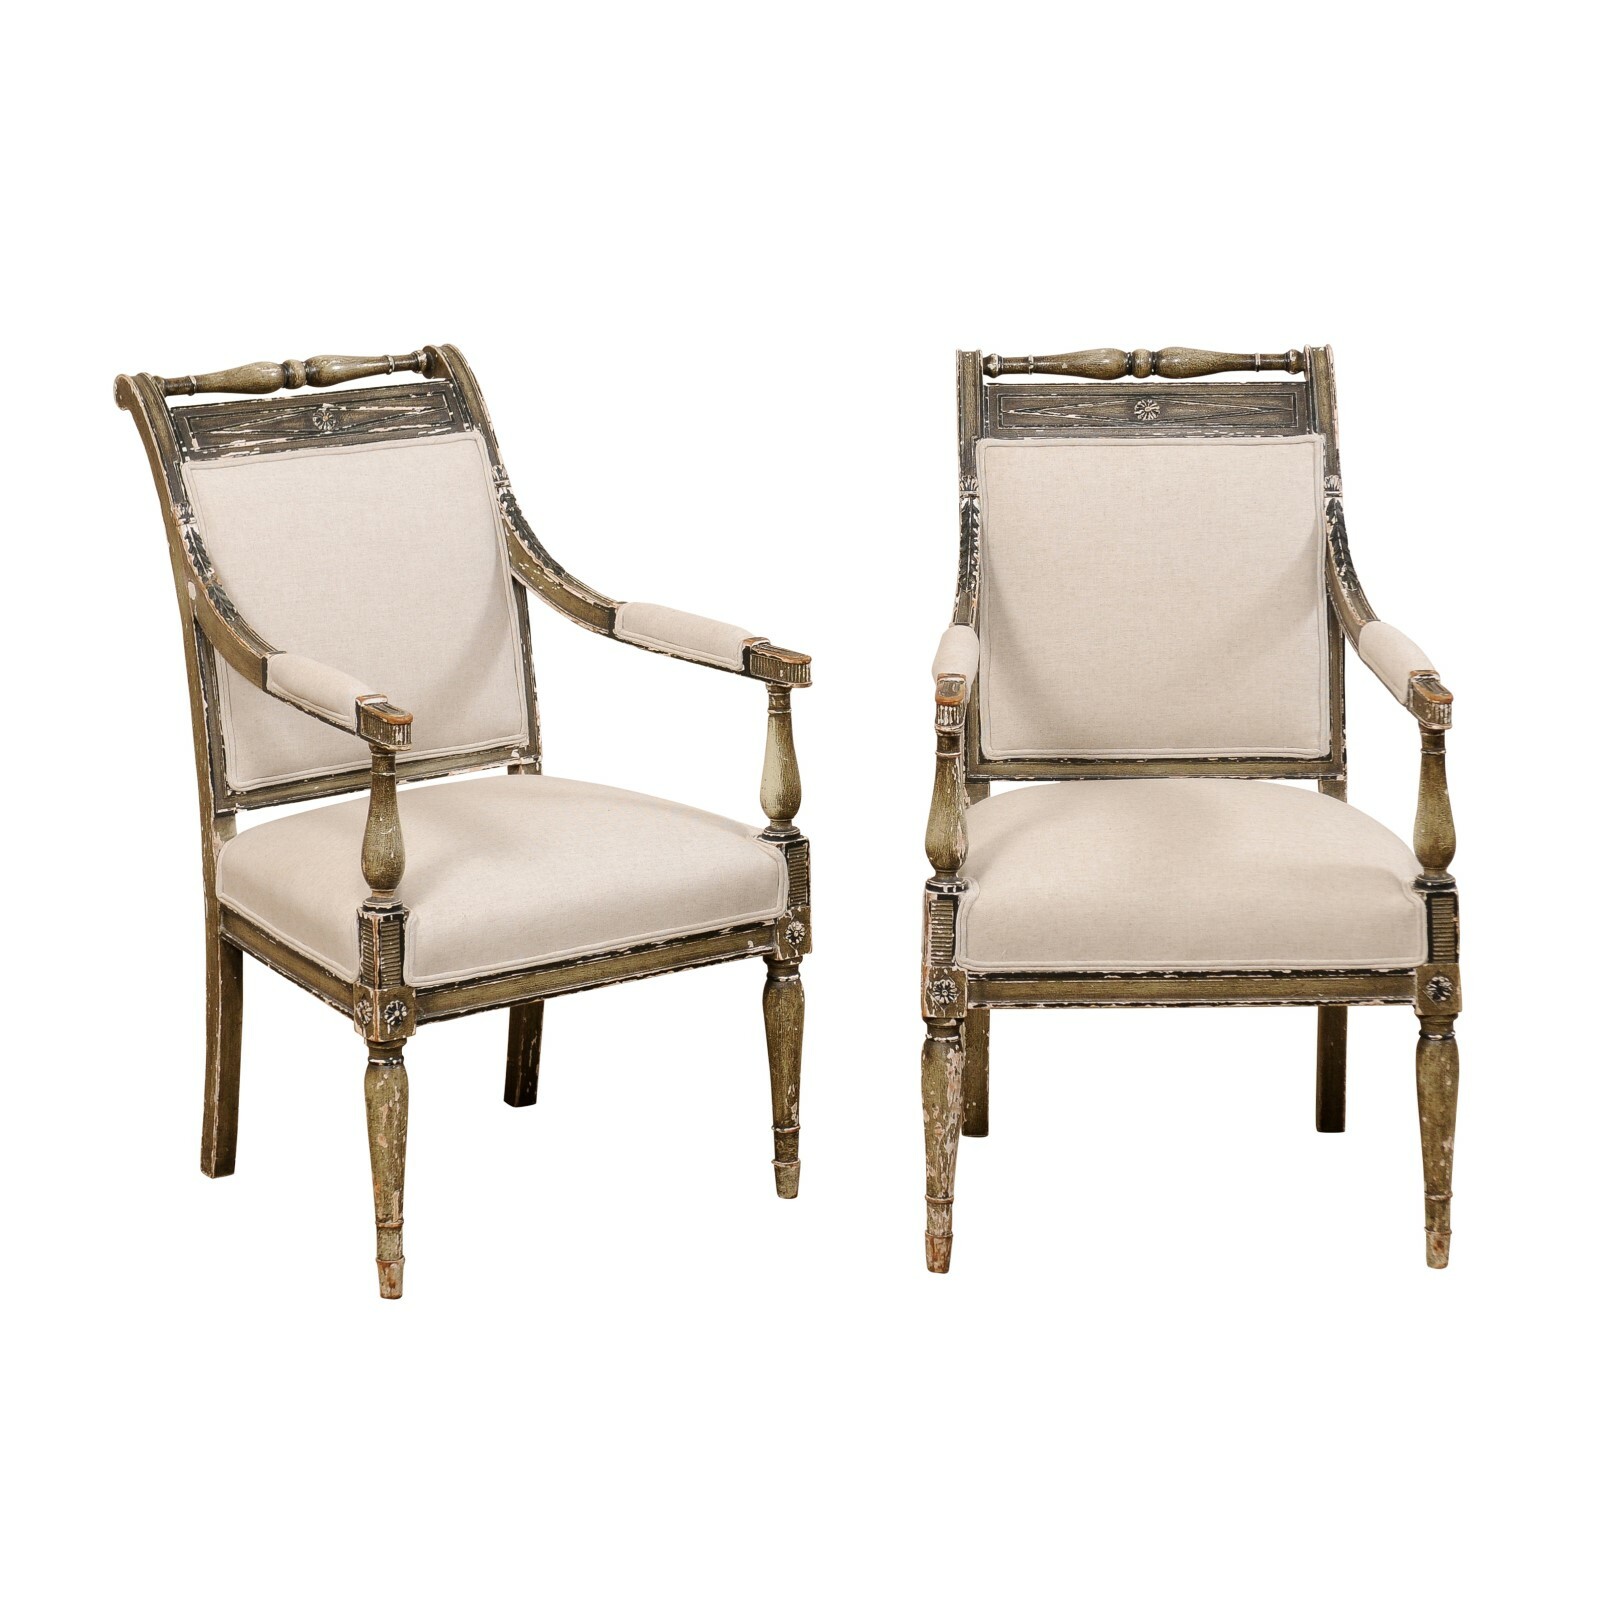 French Pair 19th C. Empire Style Fauteuils